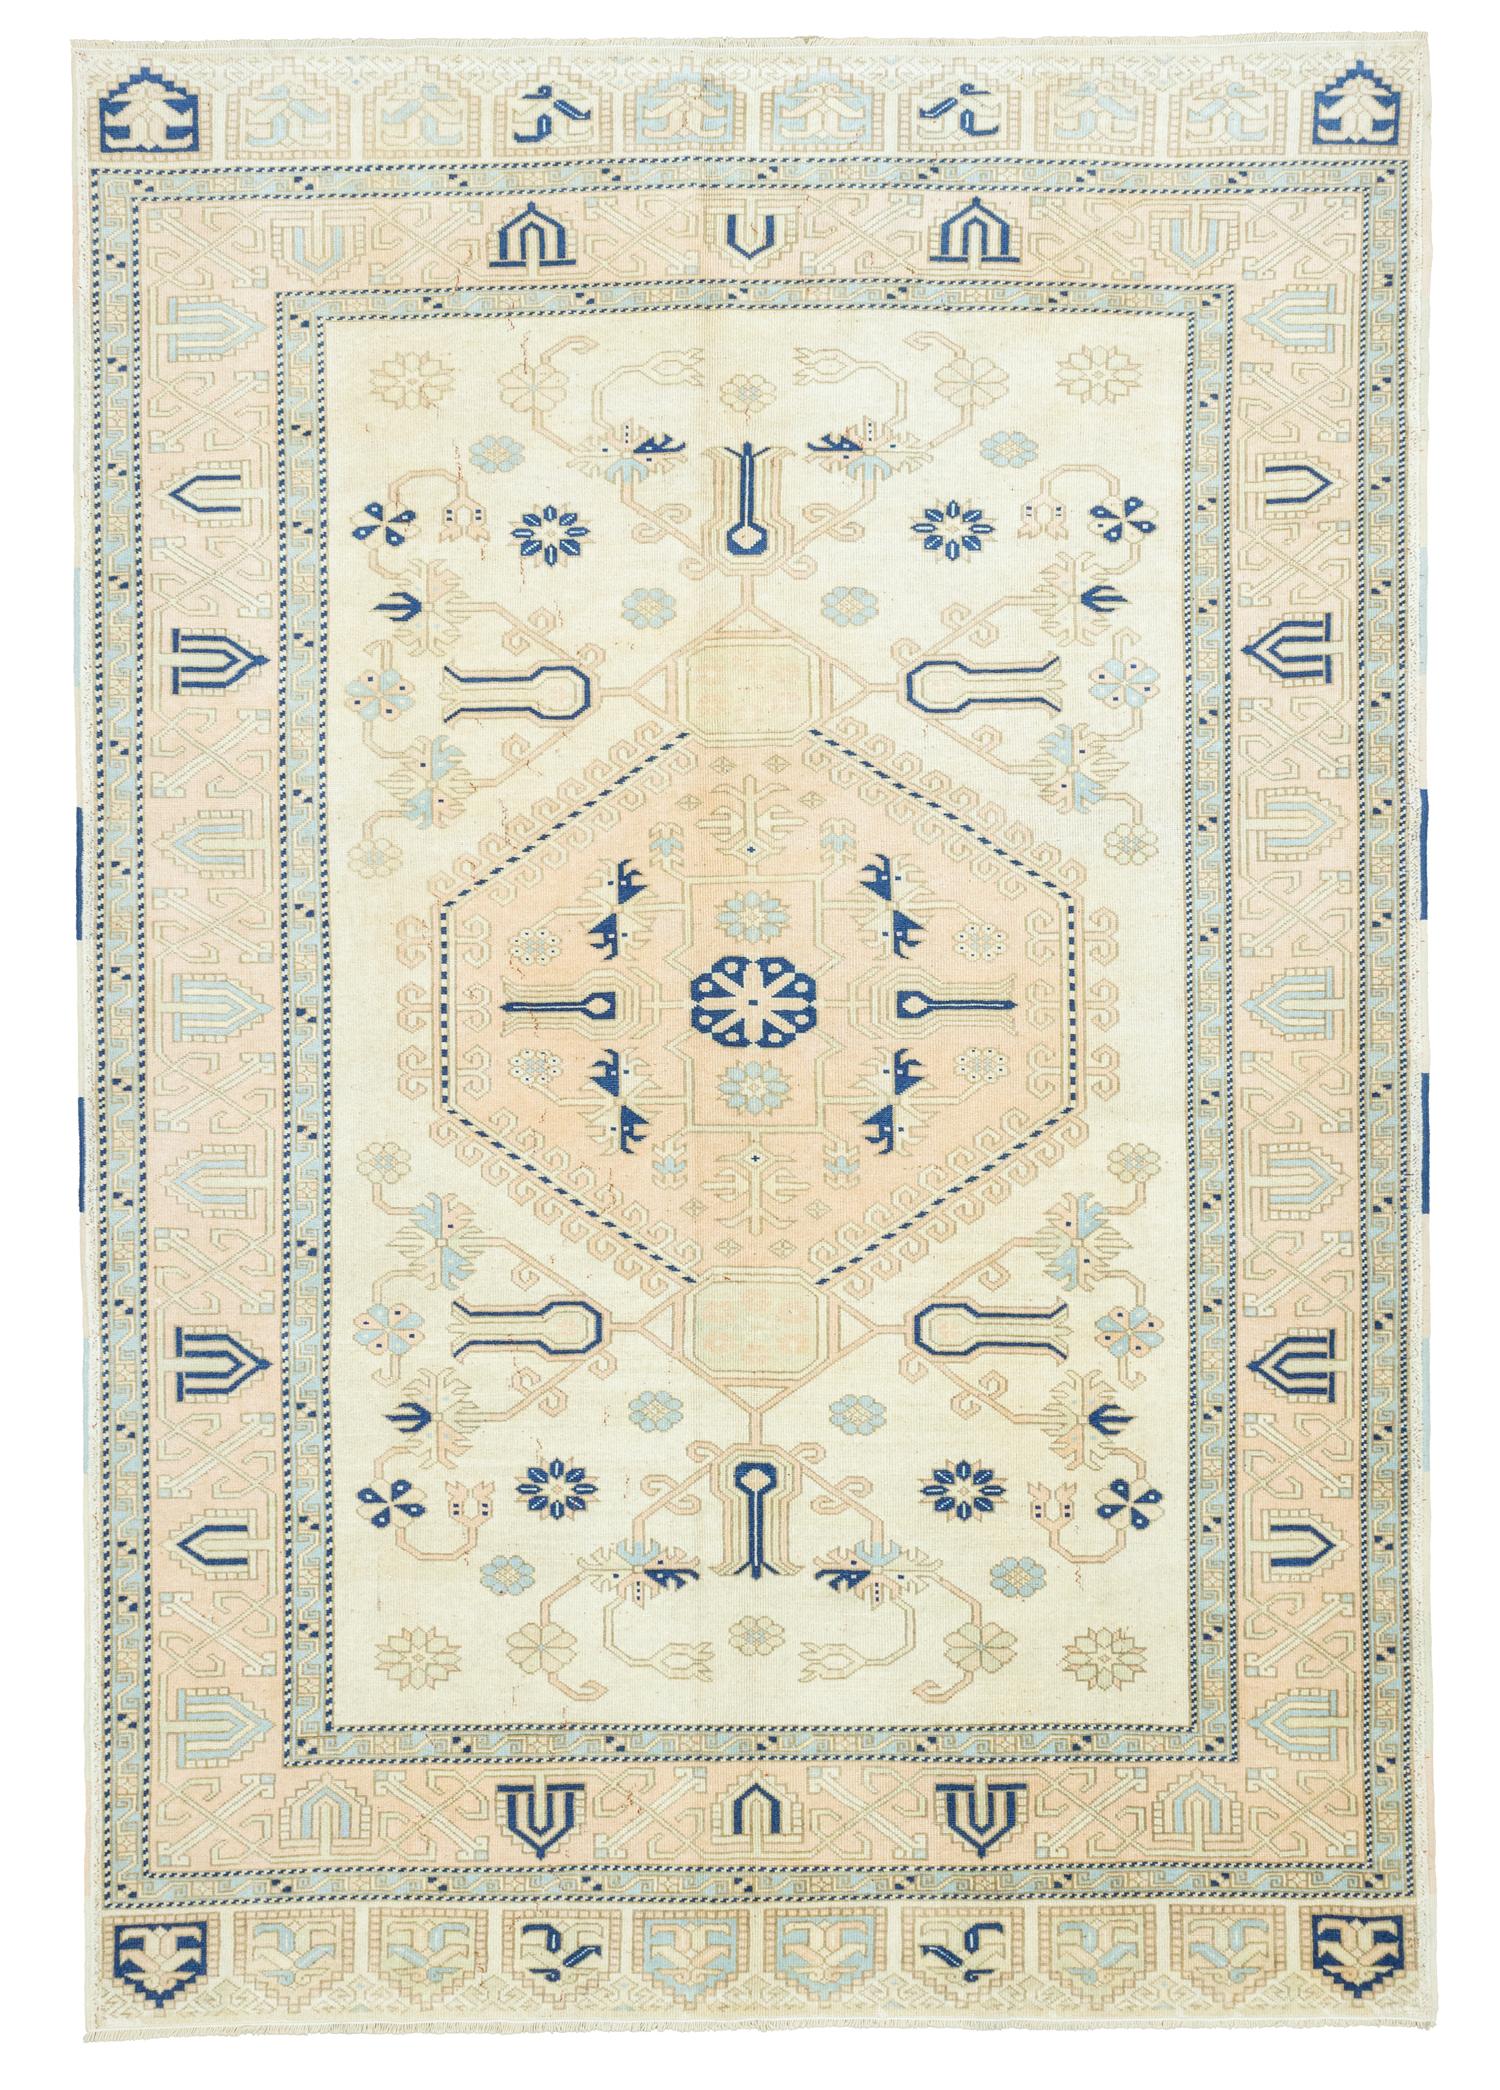 Afya Ethnic Patterned Hand-Woven Wool Rug 198x292 cm